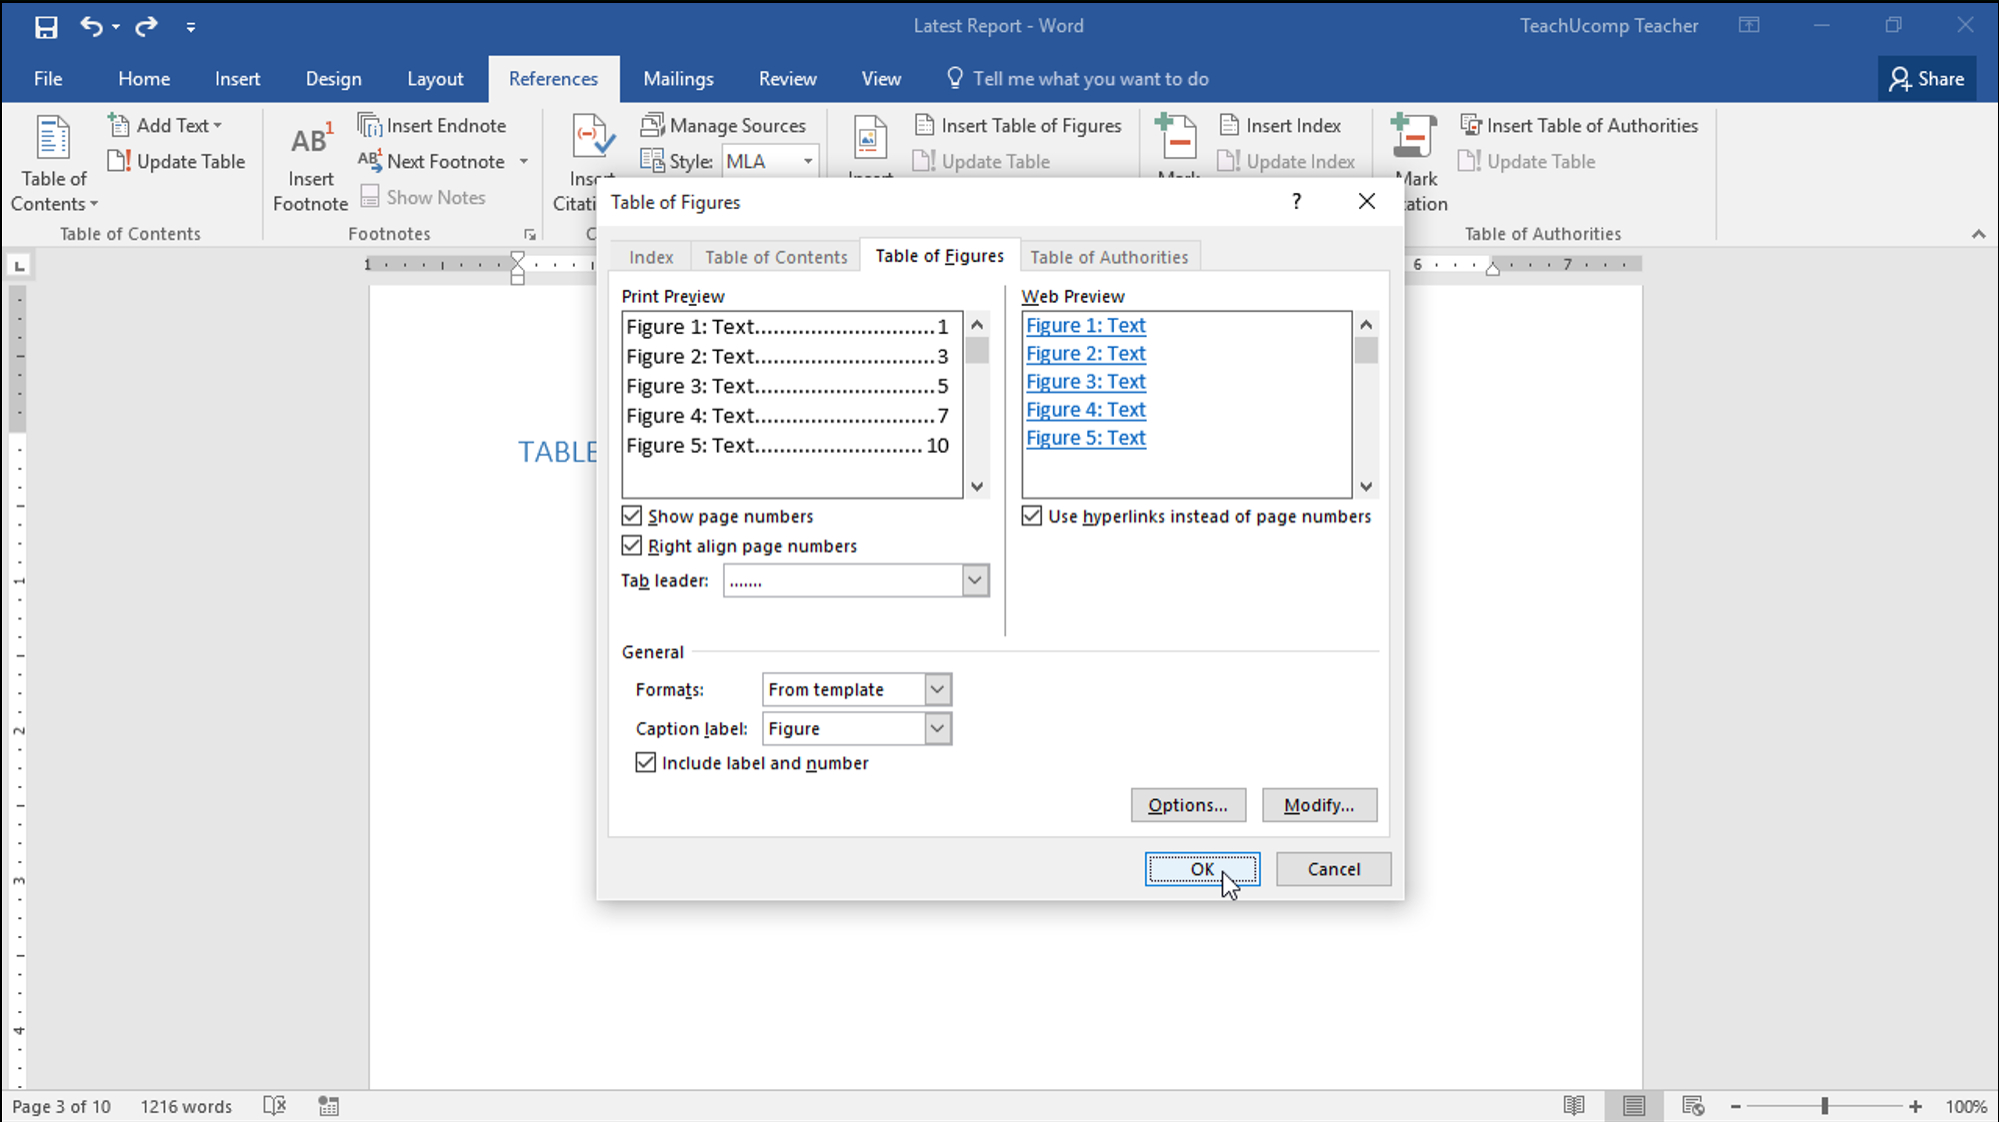 Insert A Table Of Figures In Word - Teachucomp, Inc. With Word 2013 Table Of Contents Template